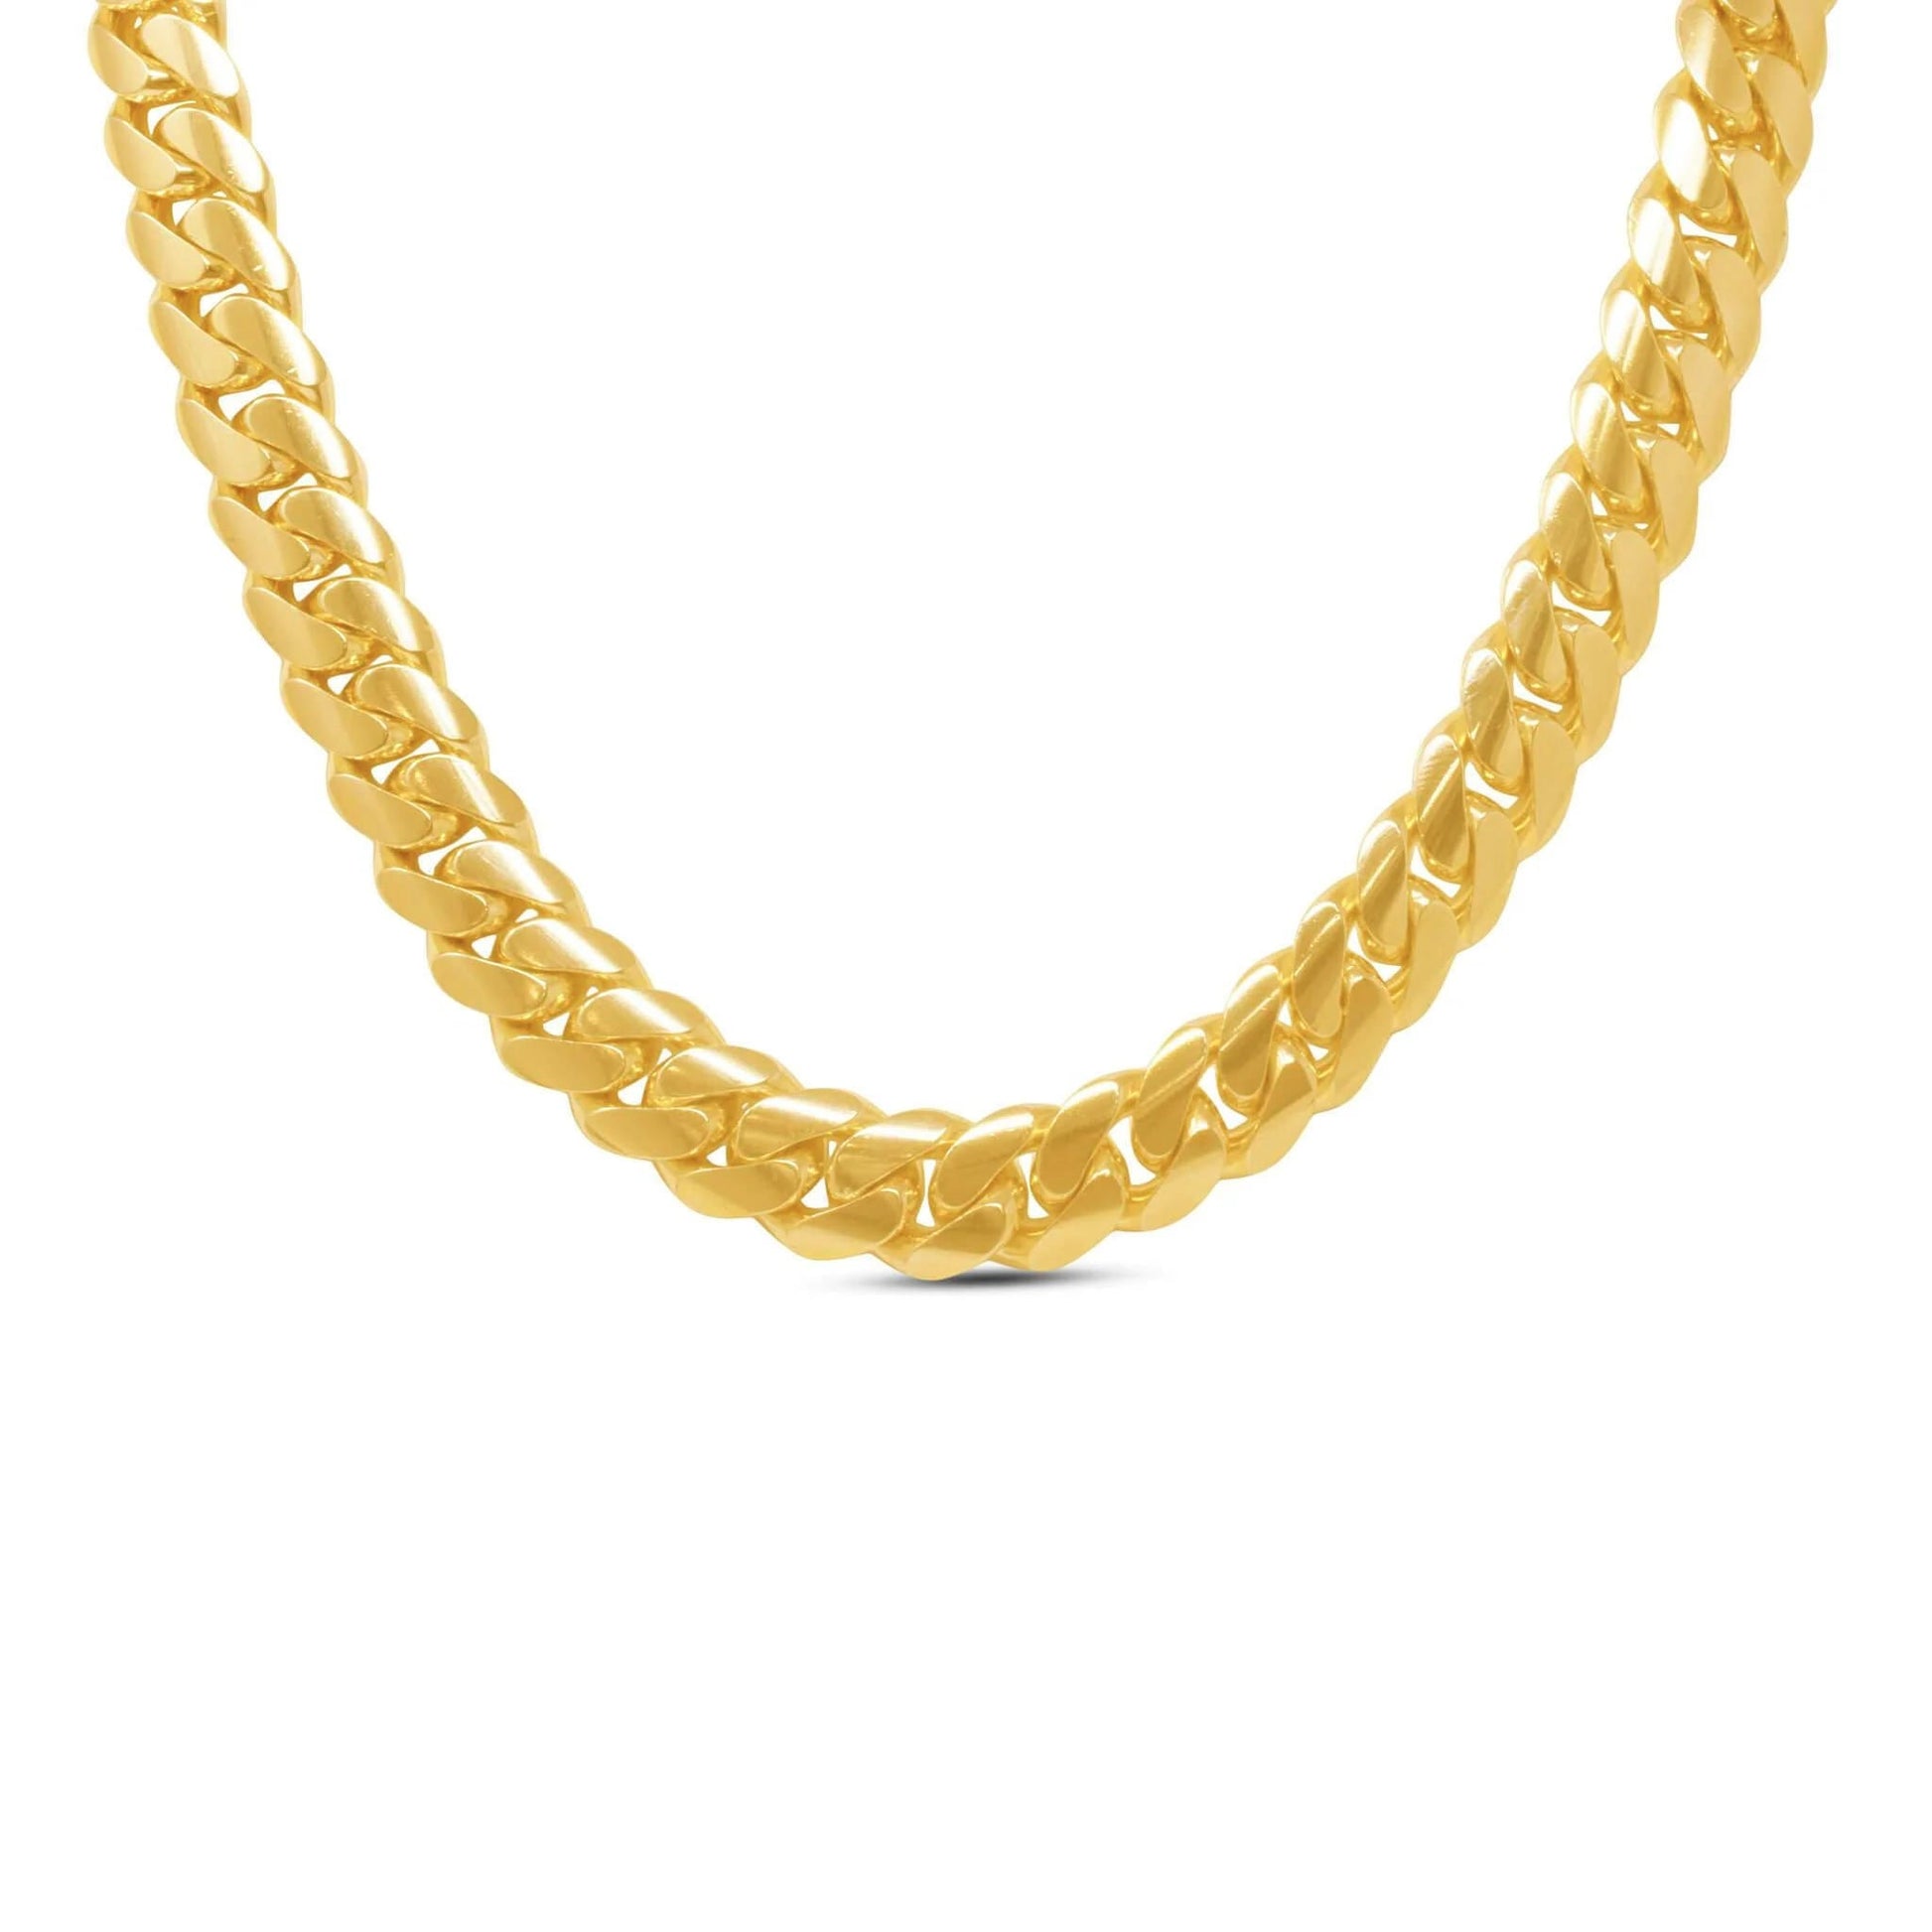 17mm Miami Cuban Link Bracelet in 10K Solid Yellow Gold - Vera Jewelry in Miami